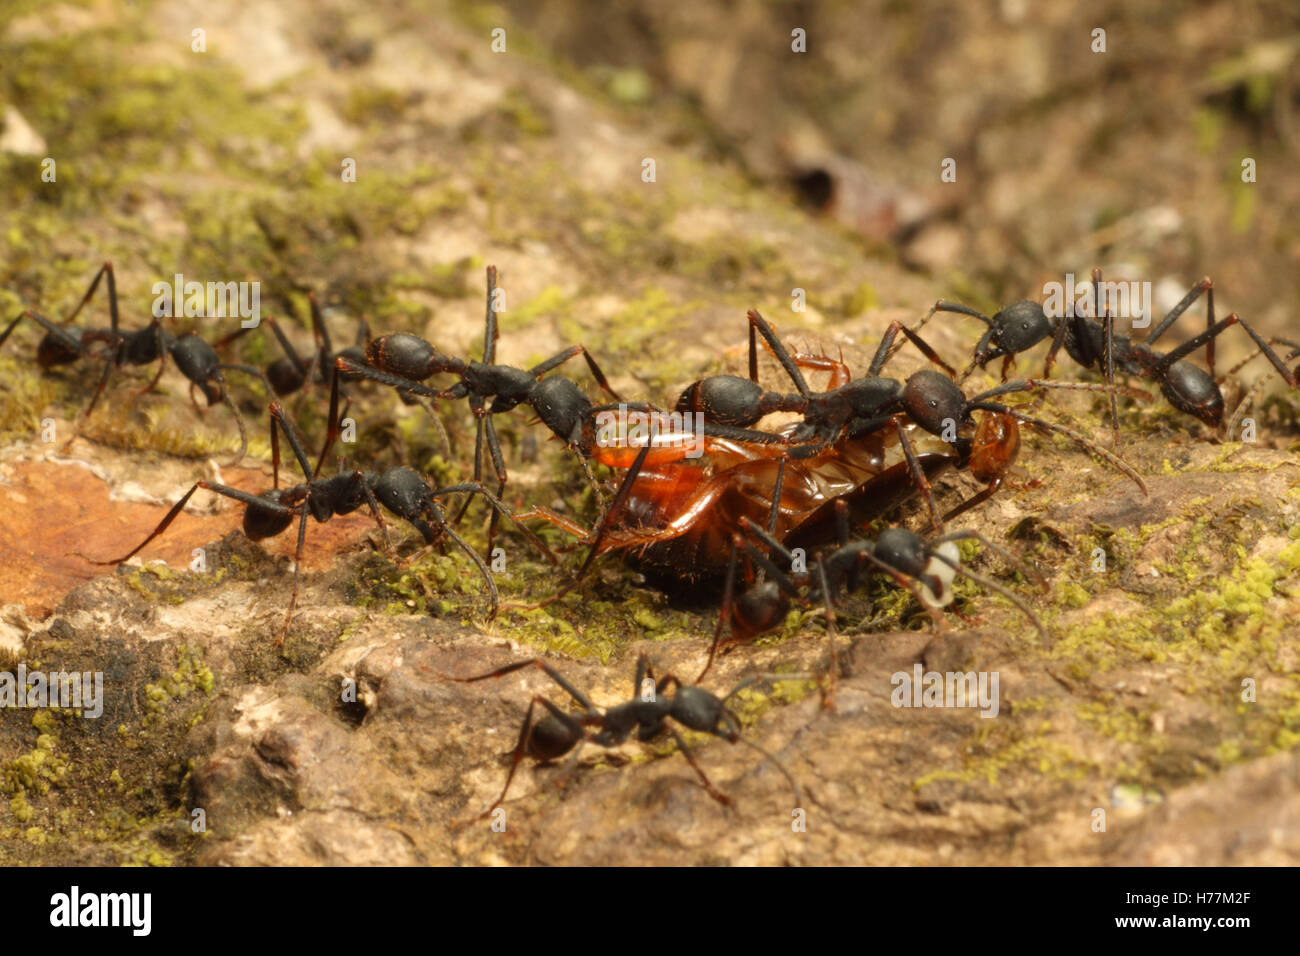 Army ants (Eciton sp.) carry a cockroach back to their bivouac. Rainforest in Rincon de la Vieja National Park, Costa Rica. Stock Photo